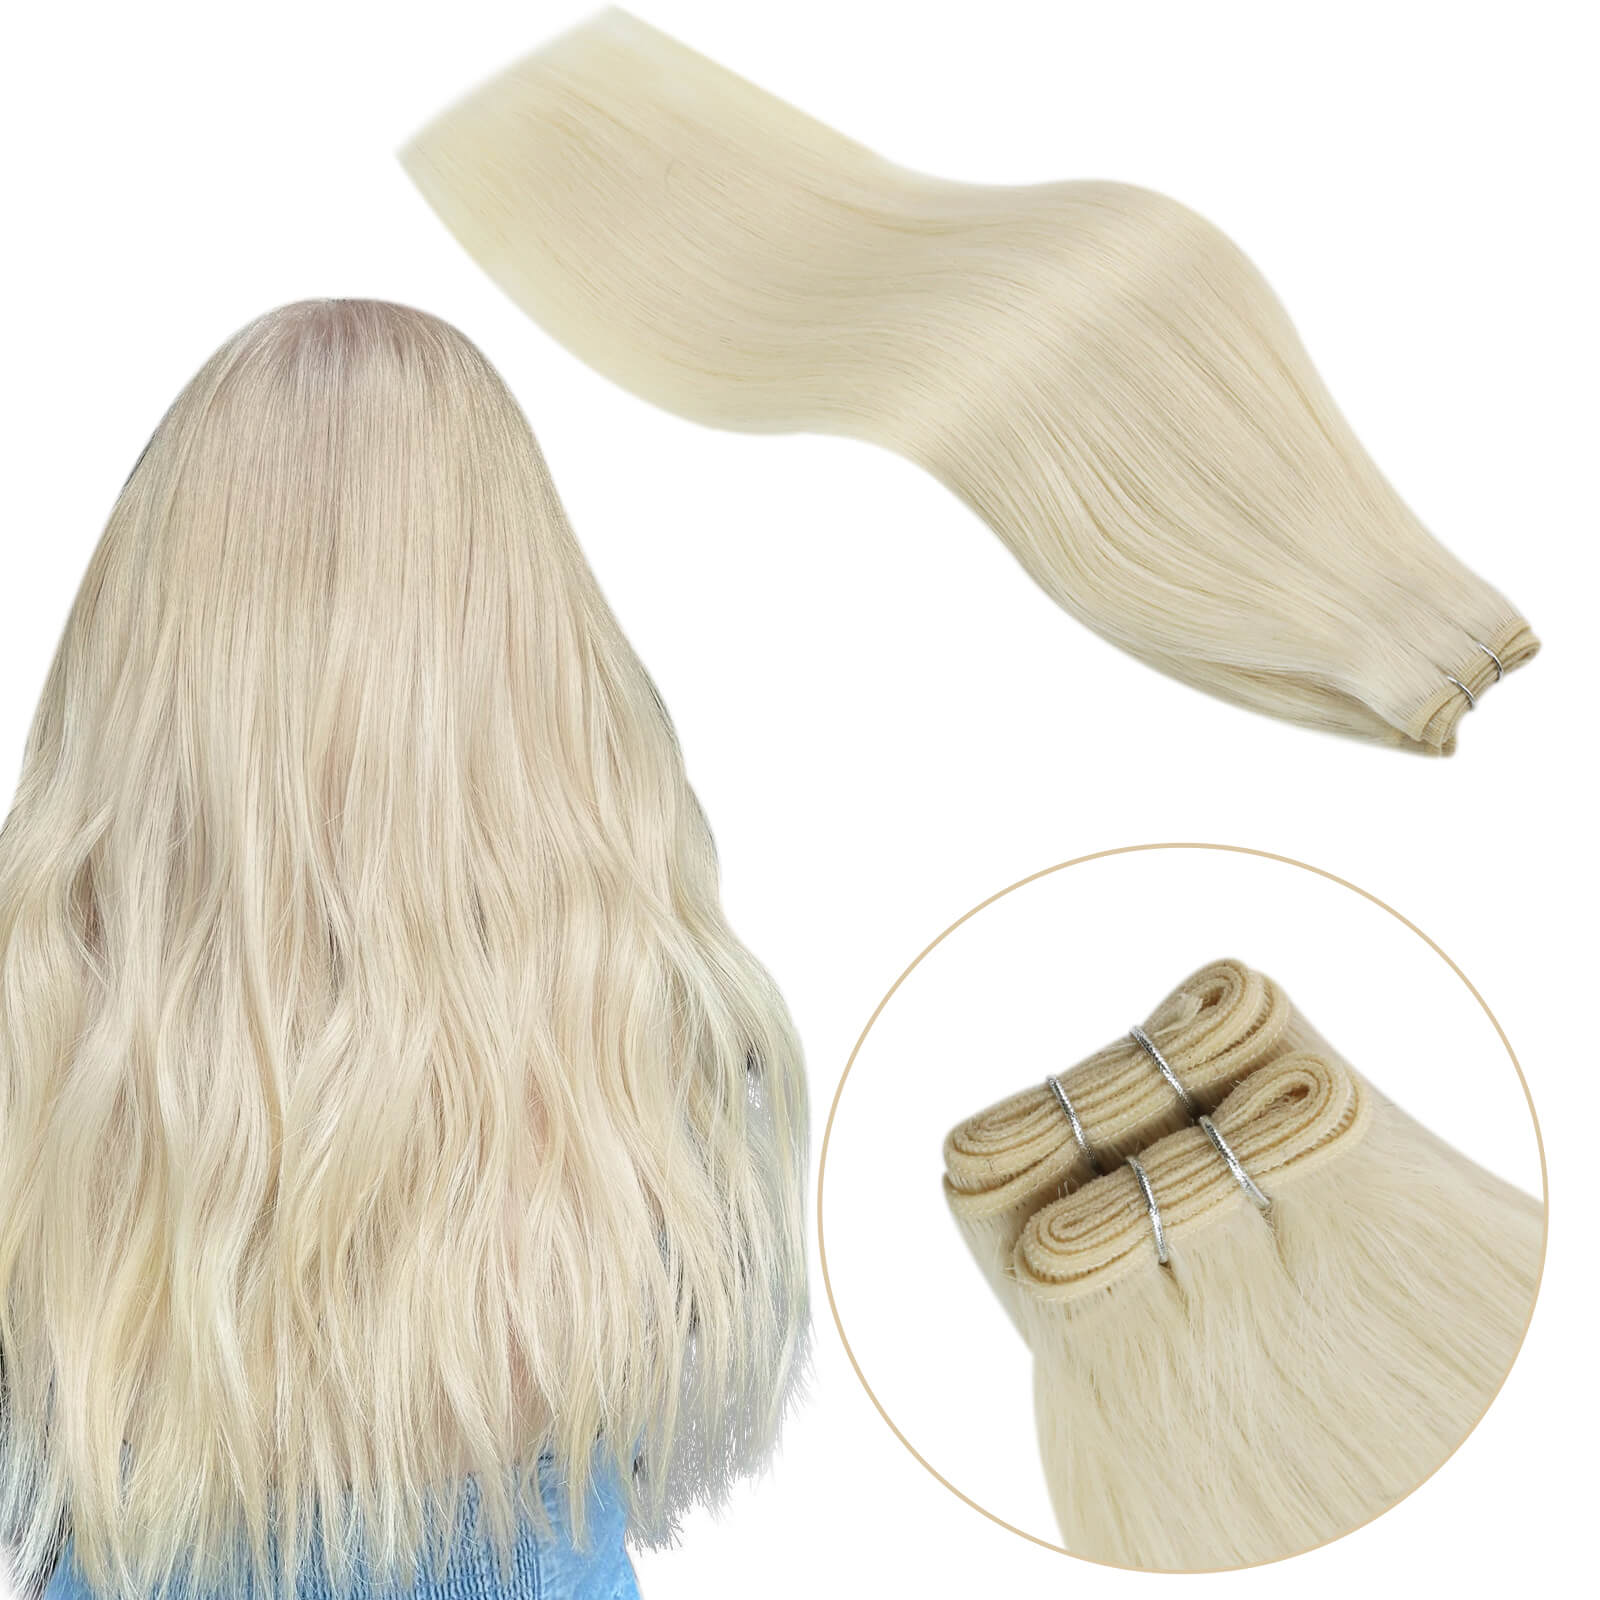 Sew in Weave Virgin Human Hair Weft Extensions Platinum Blonde #60 |Youngsee